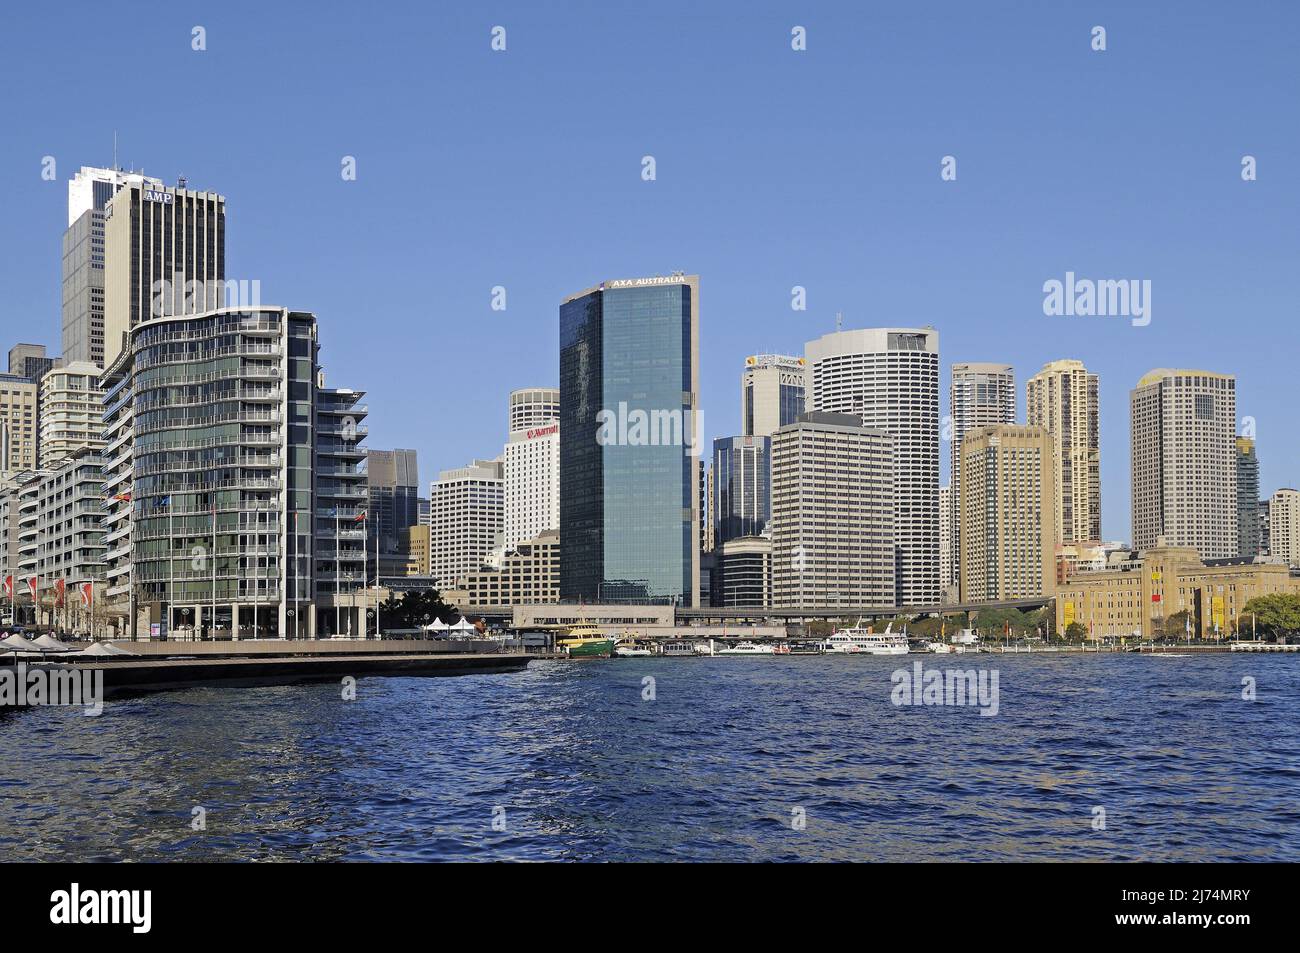 Skyscrapers of the financal districat at the Circular Quay in Sydney, Australia, Sydney Stock Photo